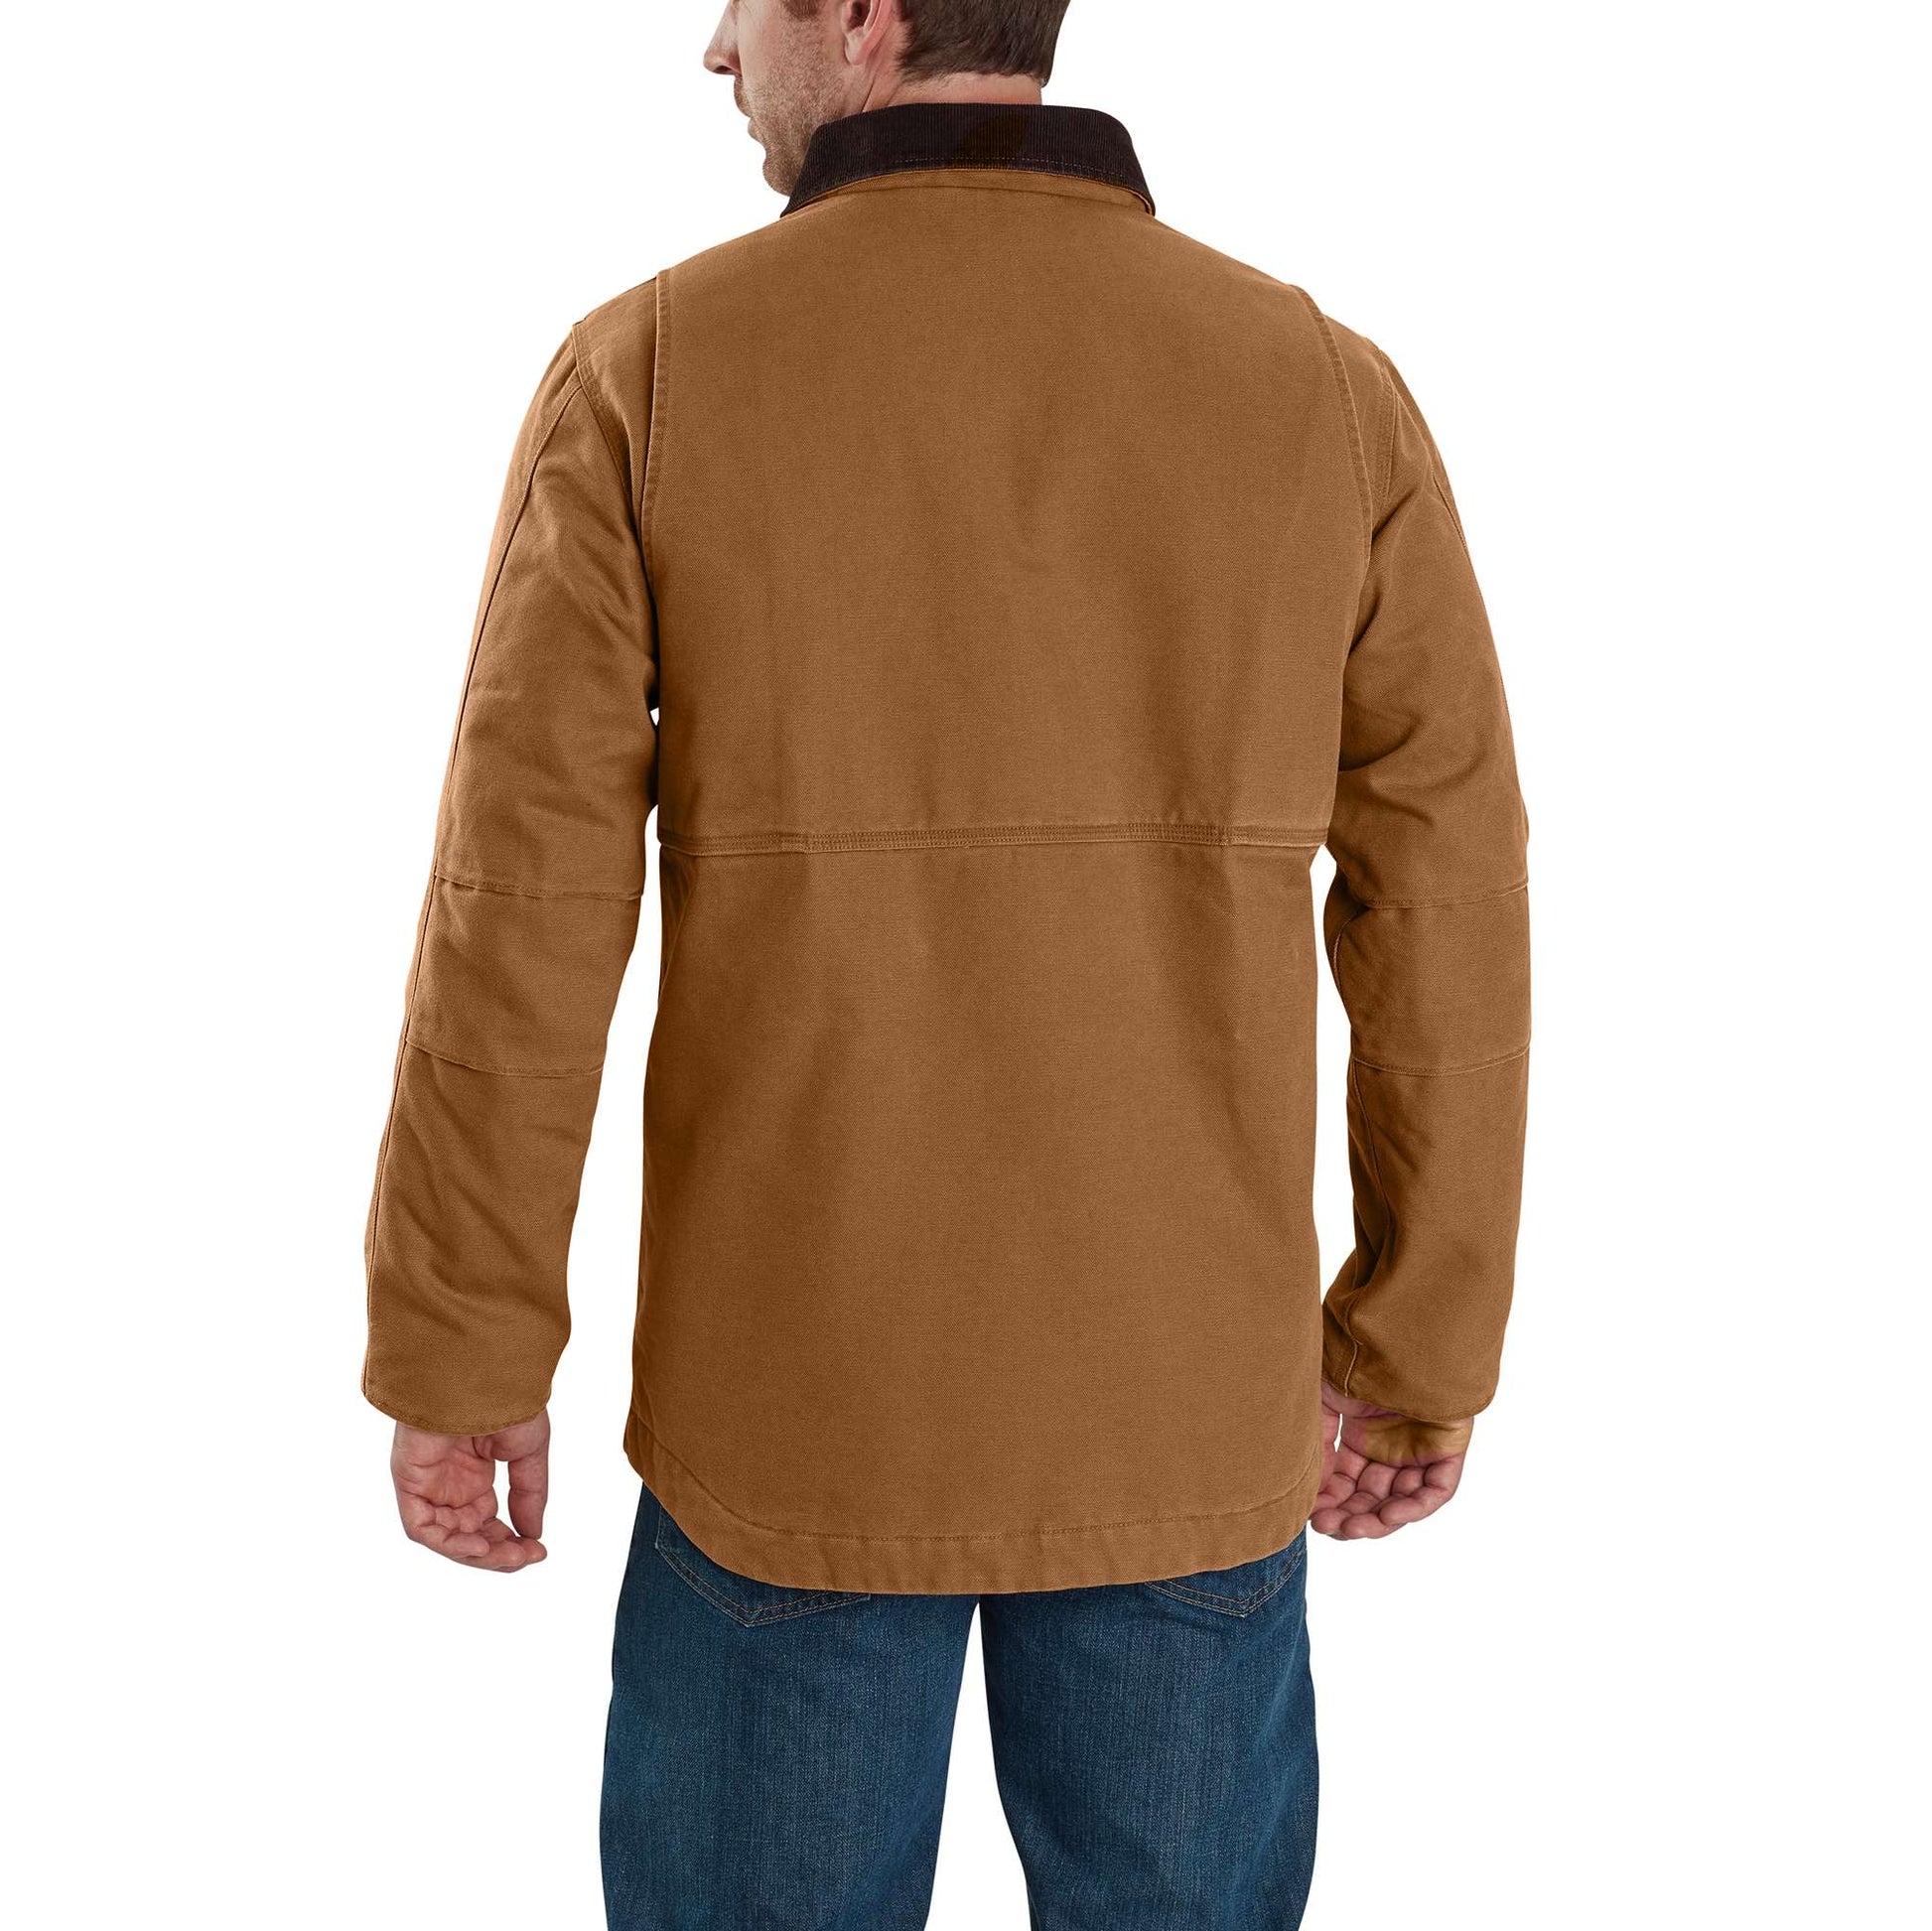 Carhartt Men's Washed Duck Insulated Active Jacket - Brown